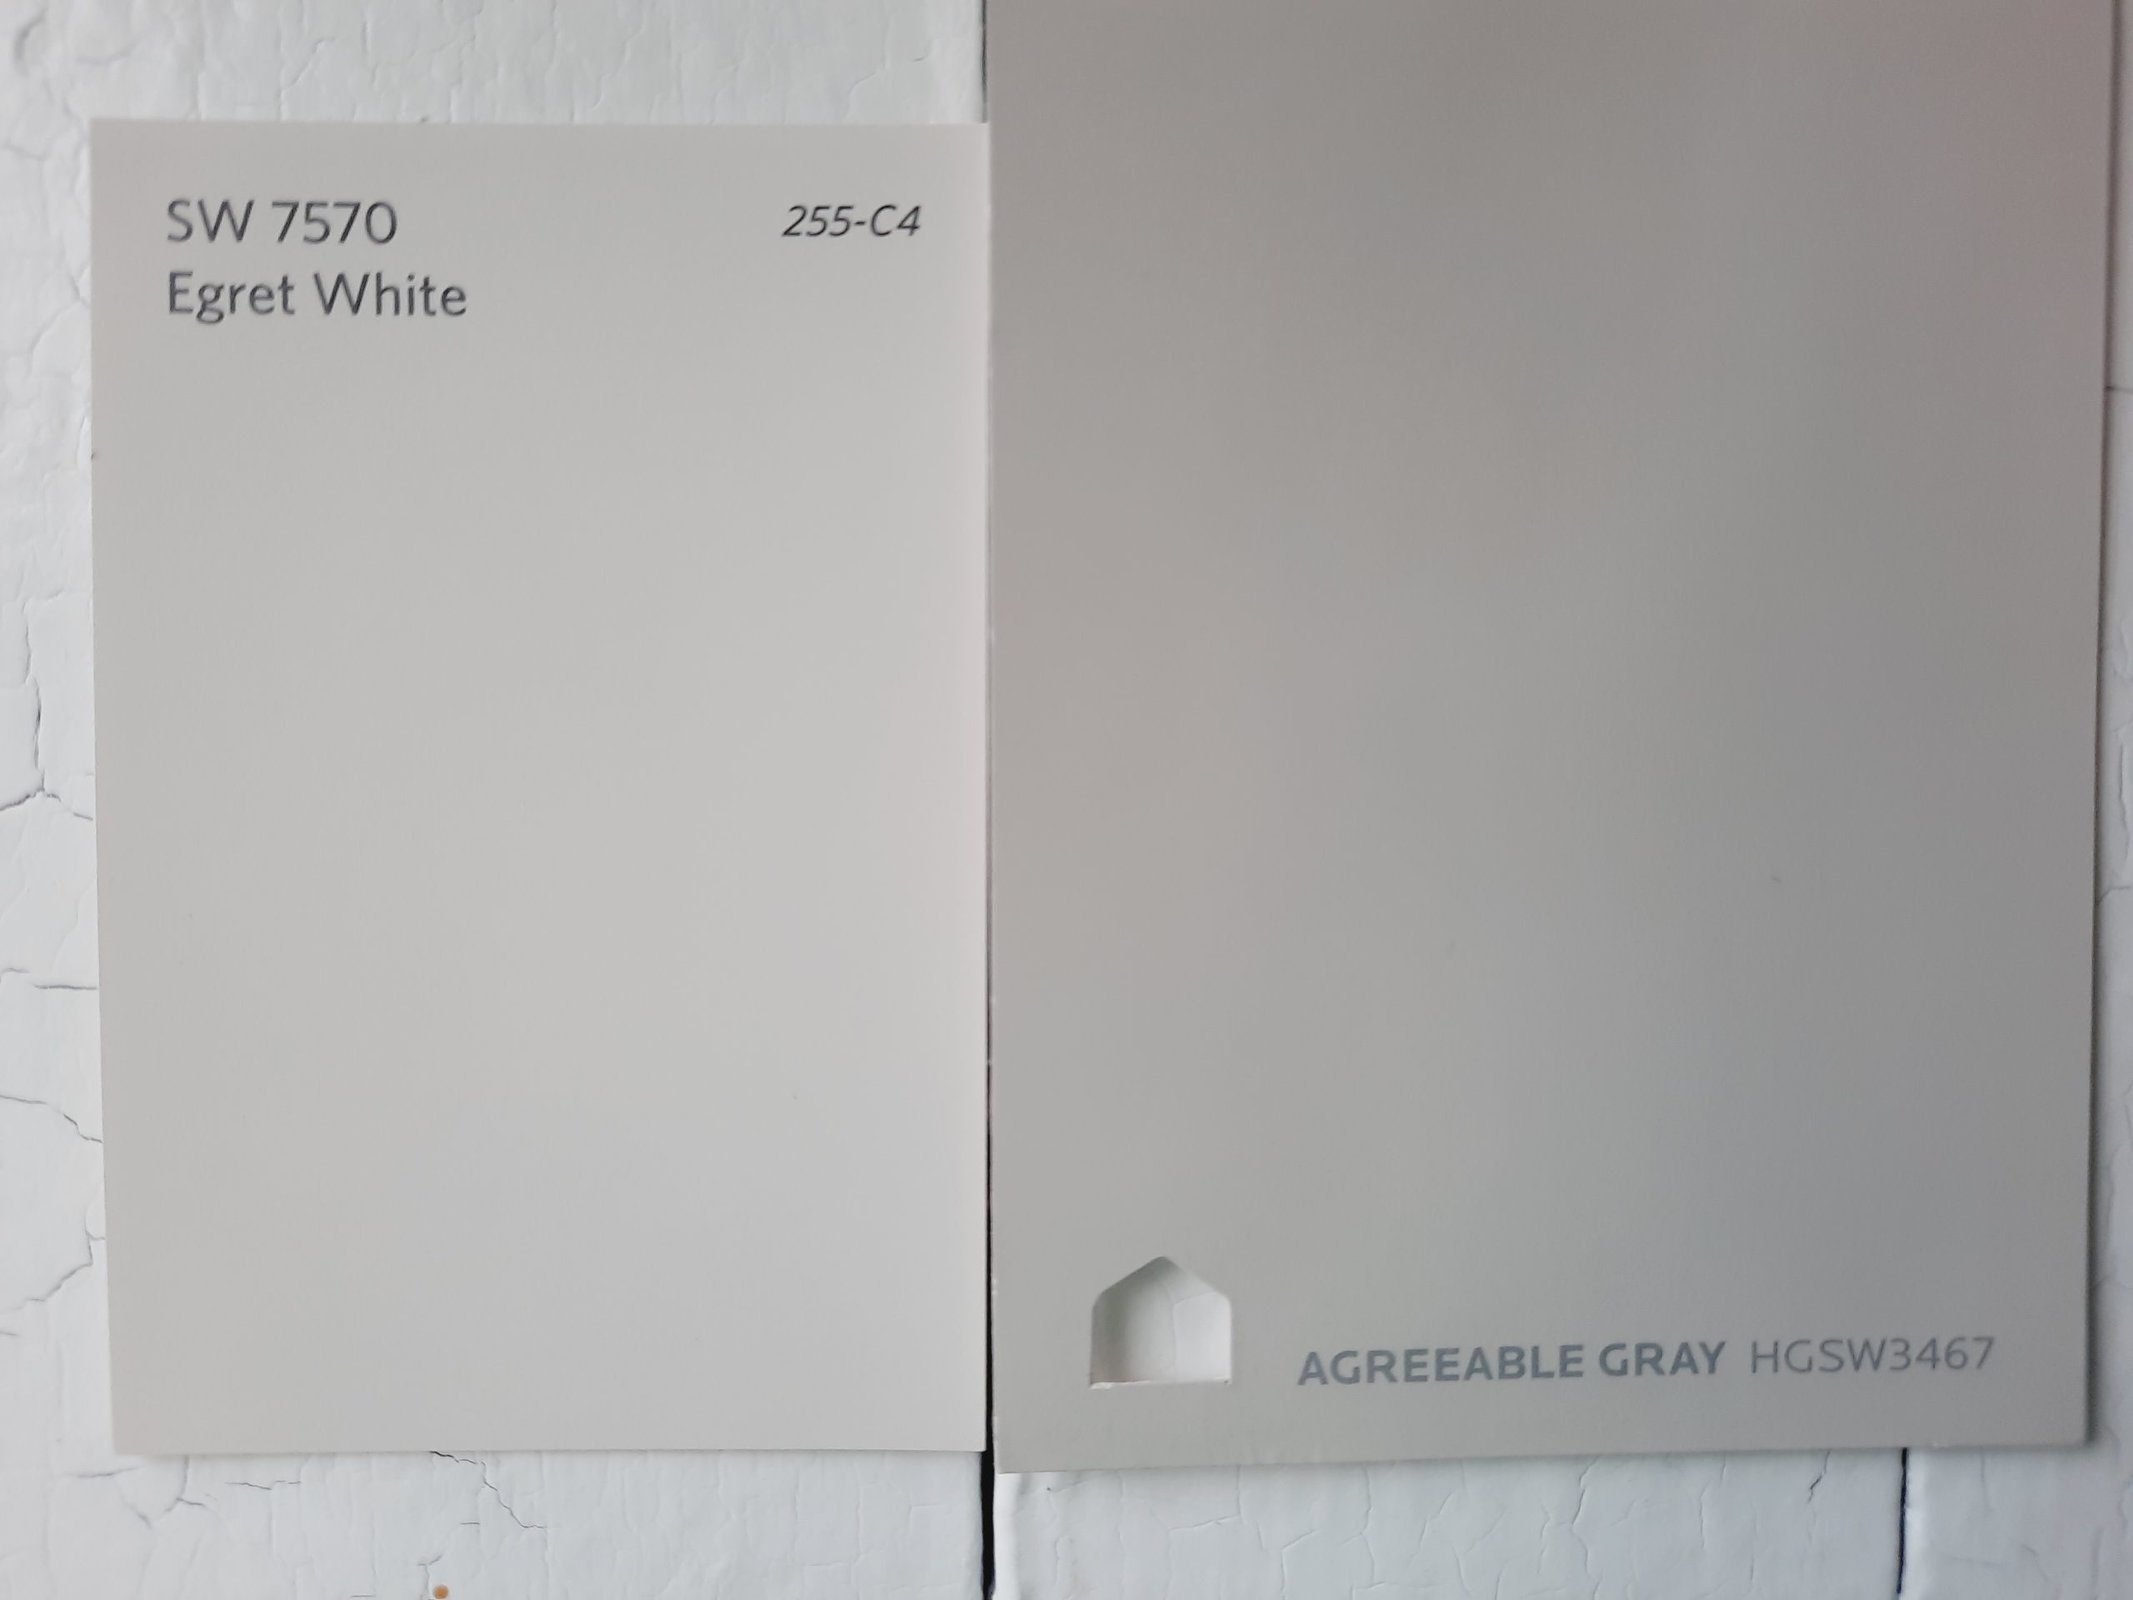 7 Egret White vs Agreeable Gray by Sherwin Williams scaled